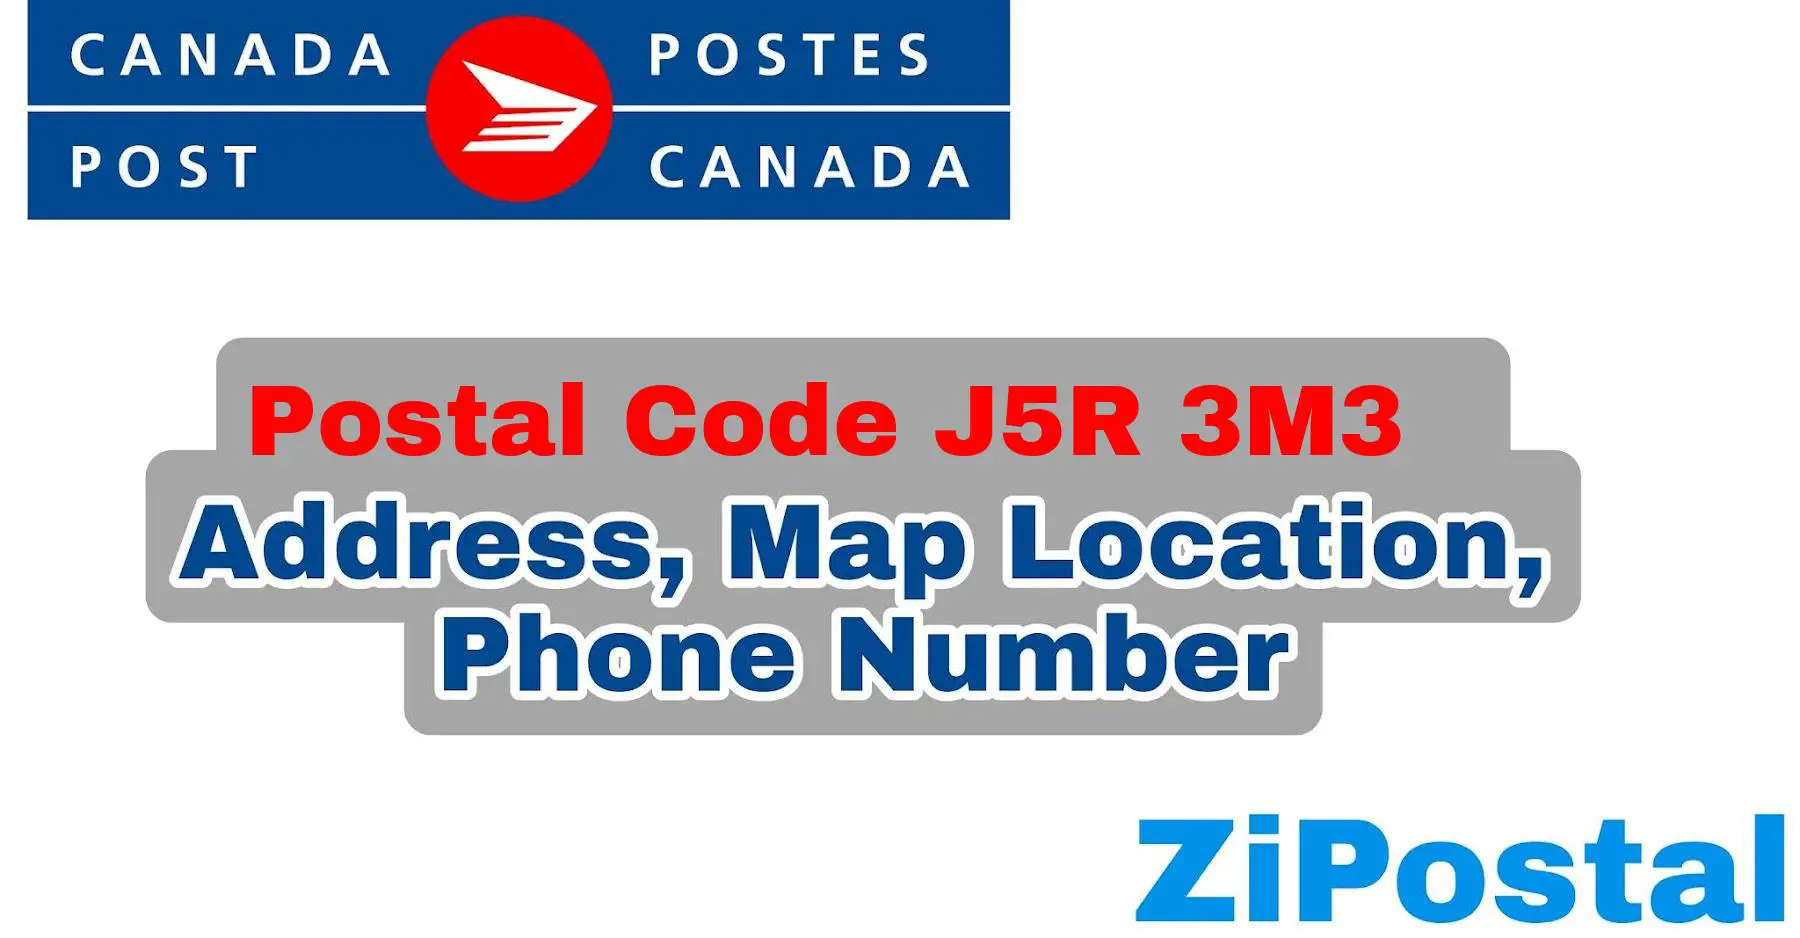 Postal Code J5R 3M3 Address Map Location and Phone Number